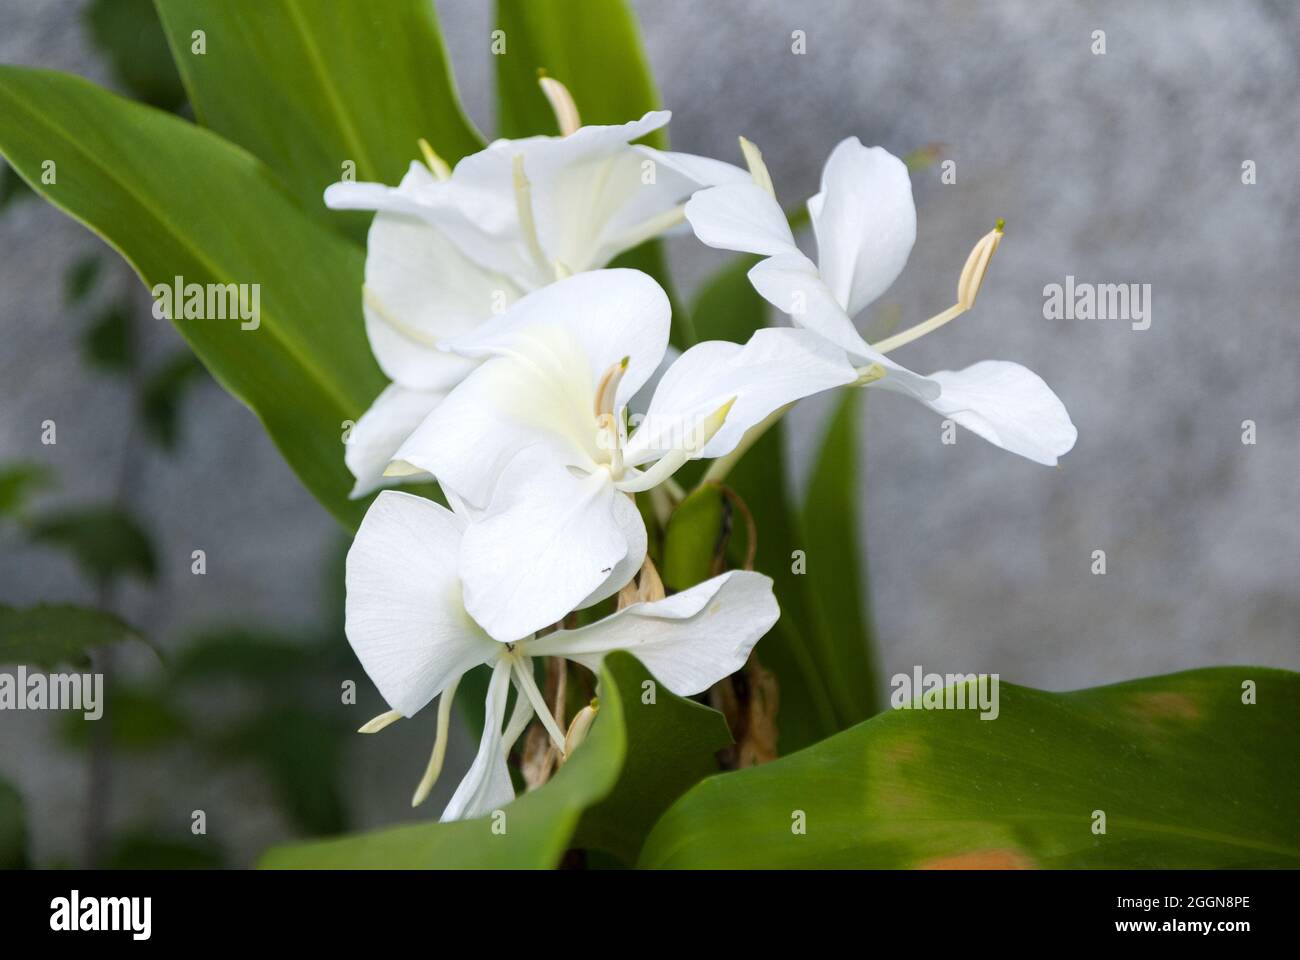 Very aromatic white flower, Hedychium coronarium, called butterfly, is the national flower of Cuba. Stock Photo